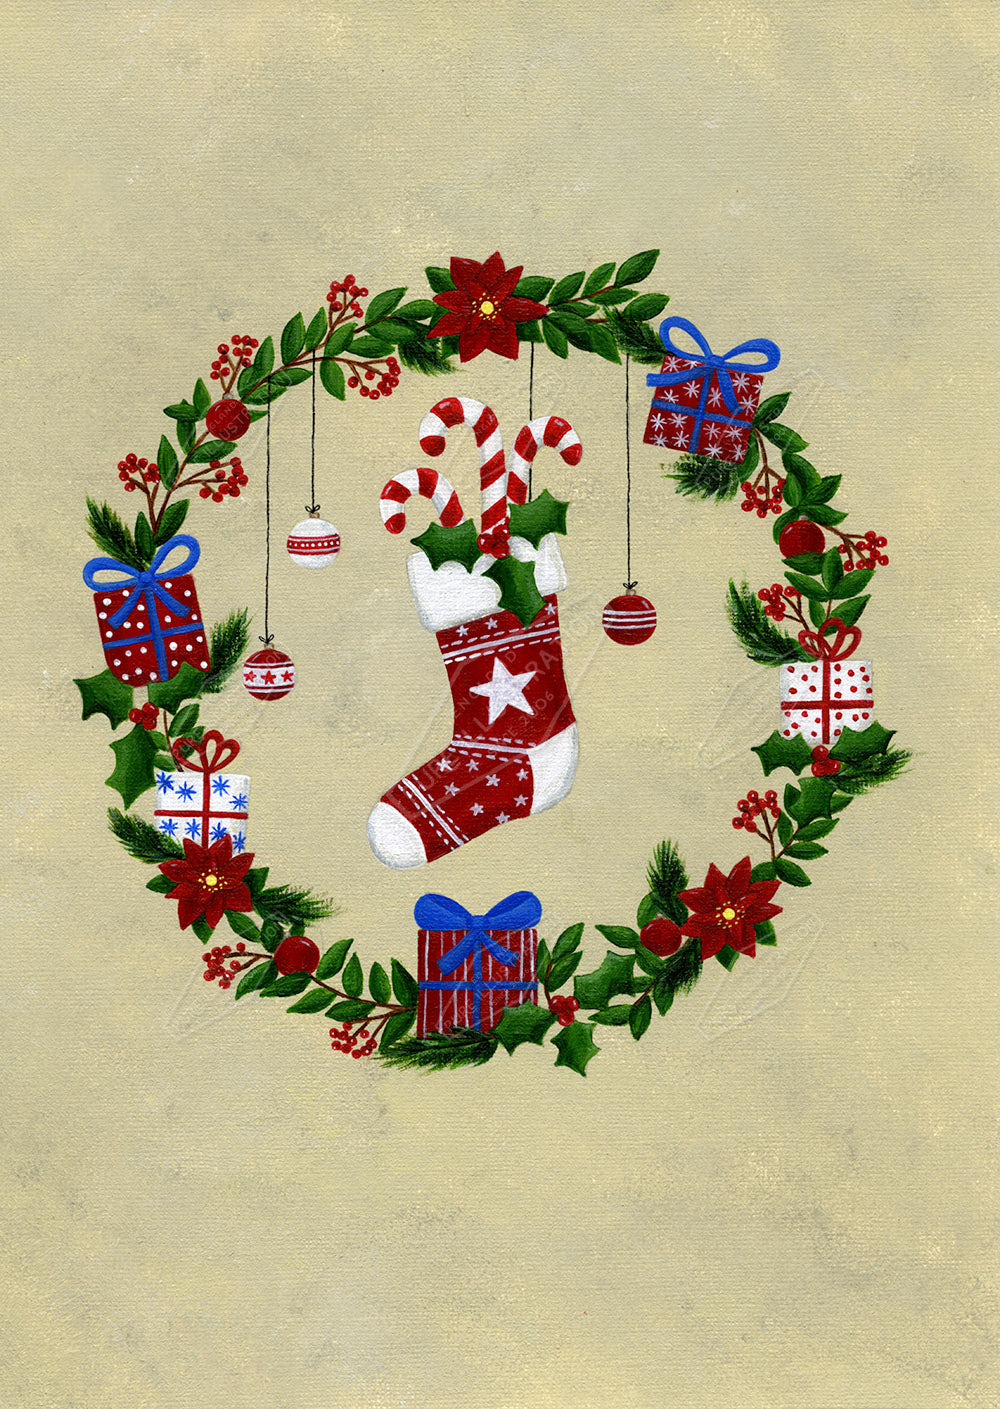 00027027AAI - Fold Wreath with Christmas Stocking by anna Aitken - Pure Art Licensing & Surface Design Agency